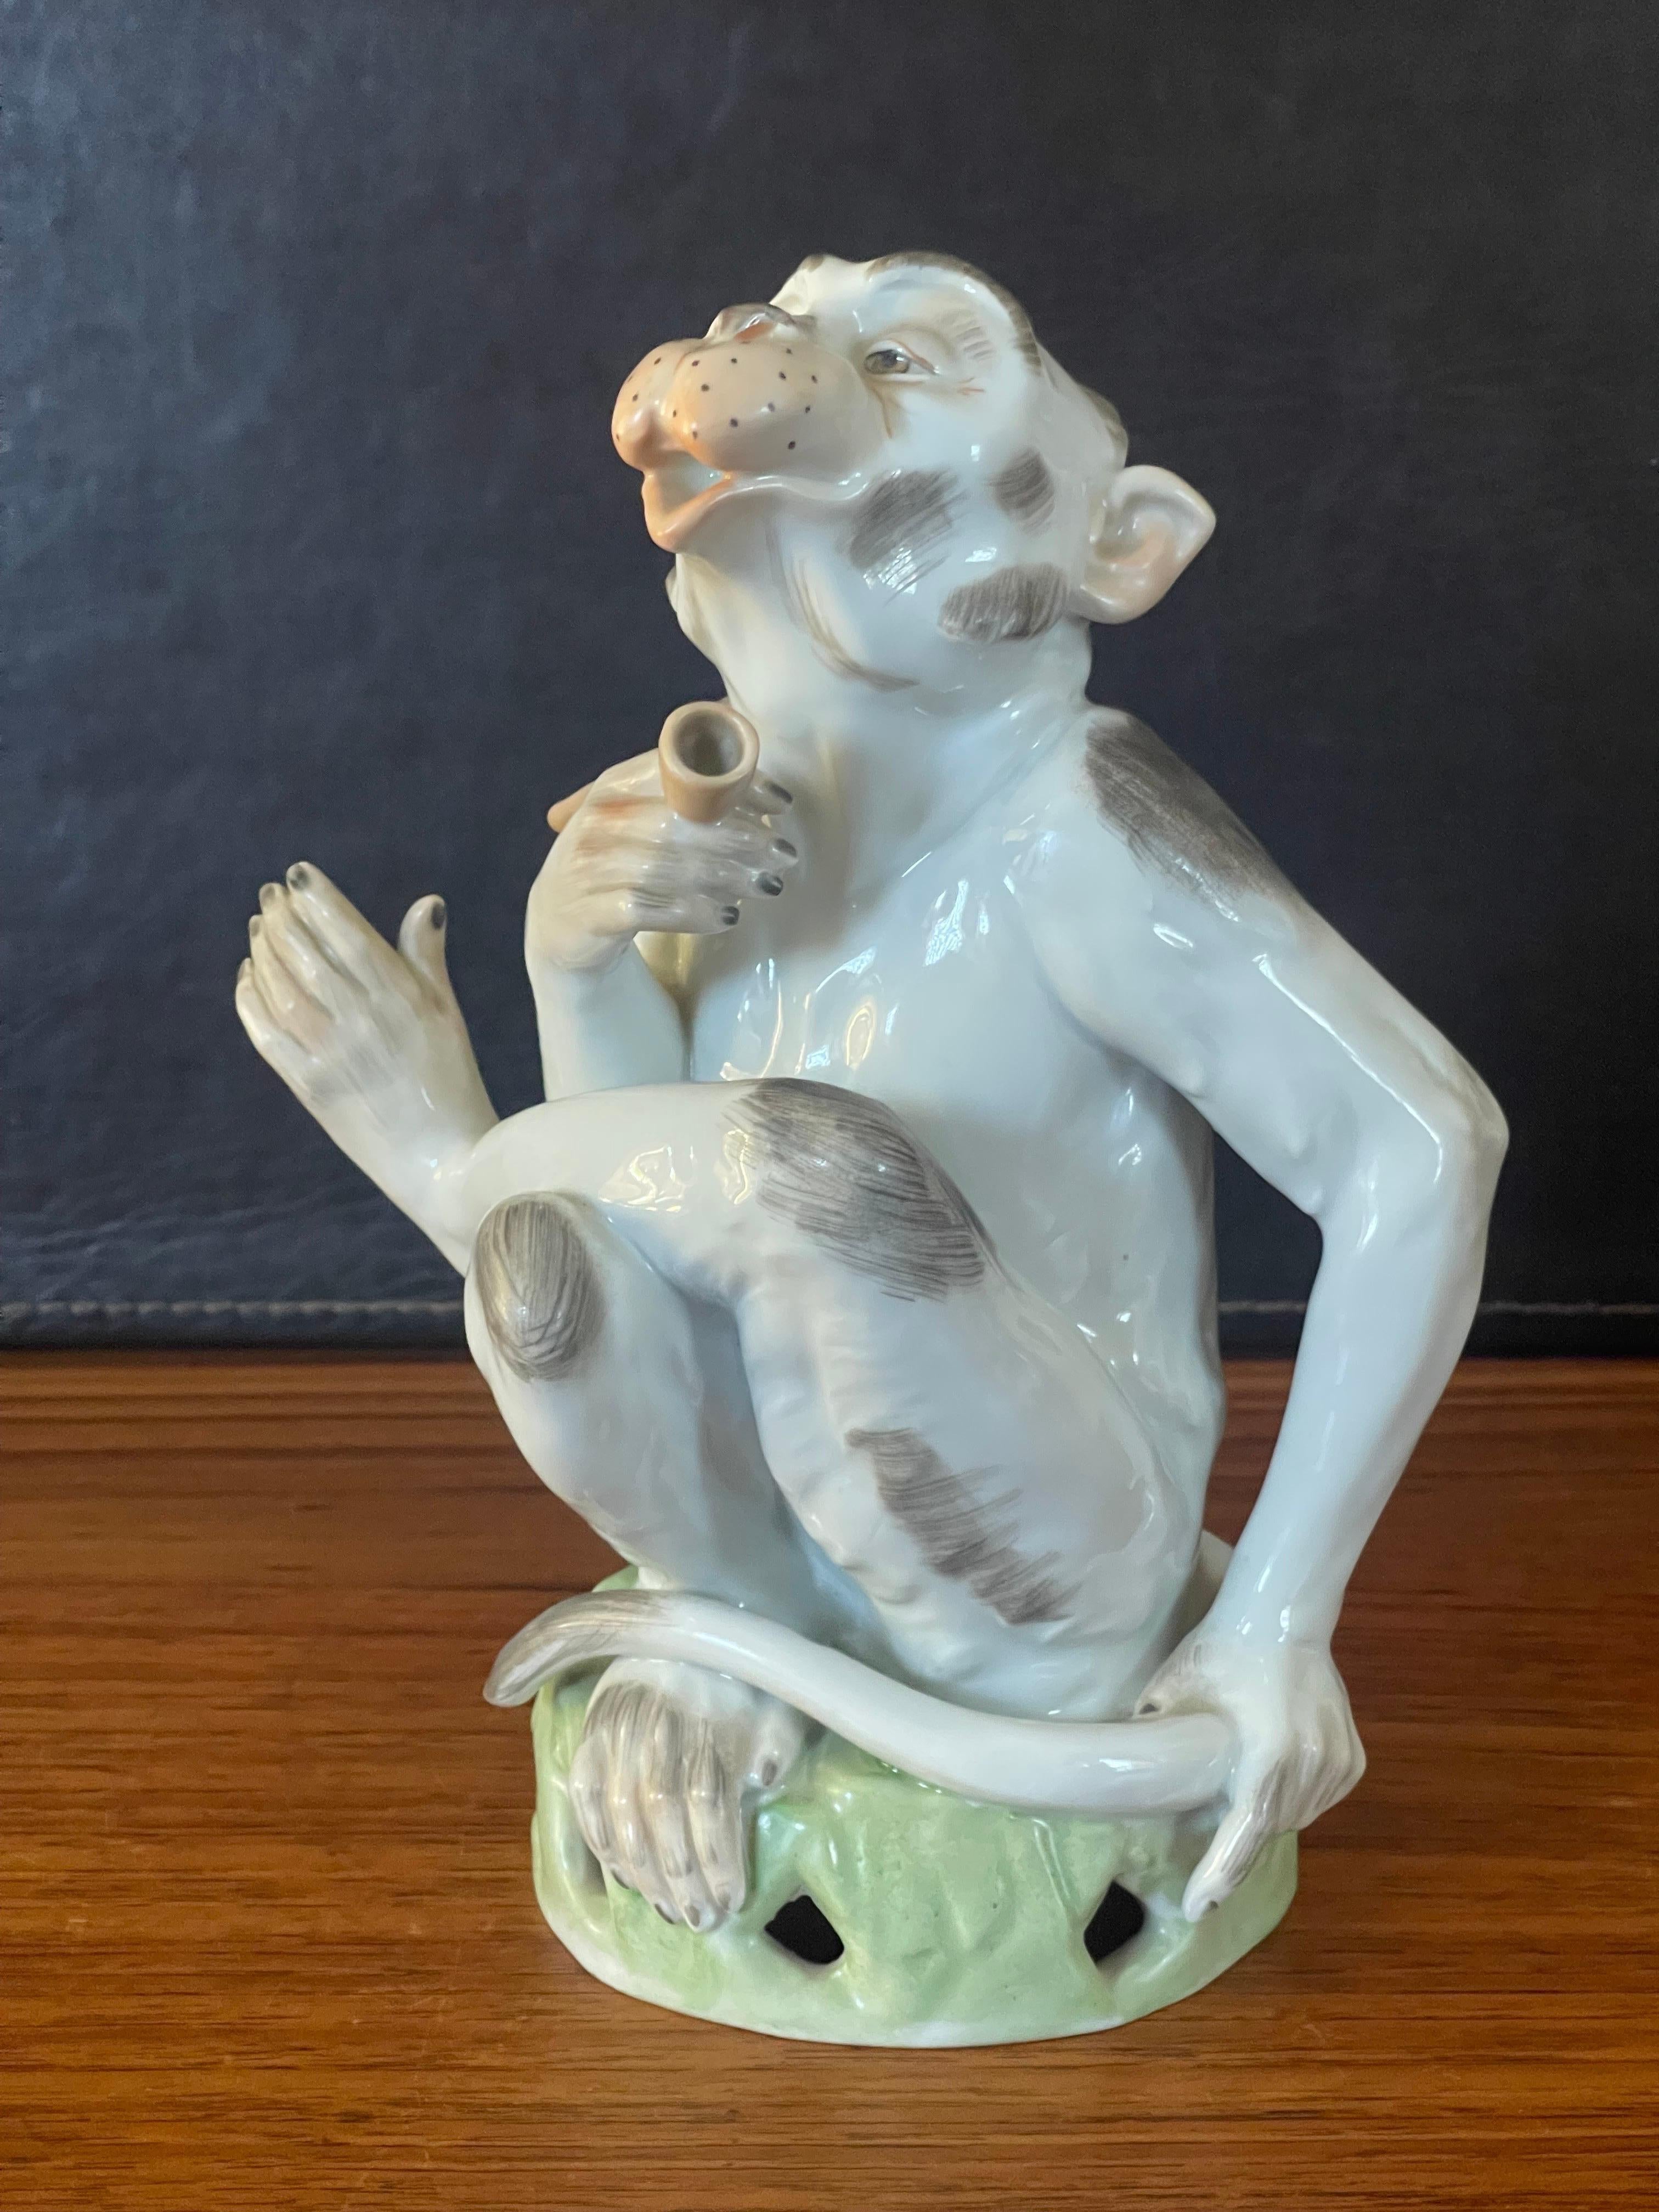 Whimsical porcelain smoking monkey with pipe by artist Carl Thieme for Dresden, circa 1920s. This finely formed porcelain figurine is entirely handmade and handpainted with stunning and refined colors. Handmade in Germany with blue Dresden marks on